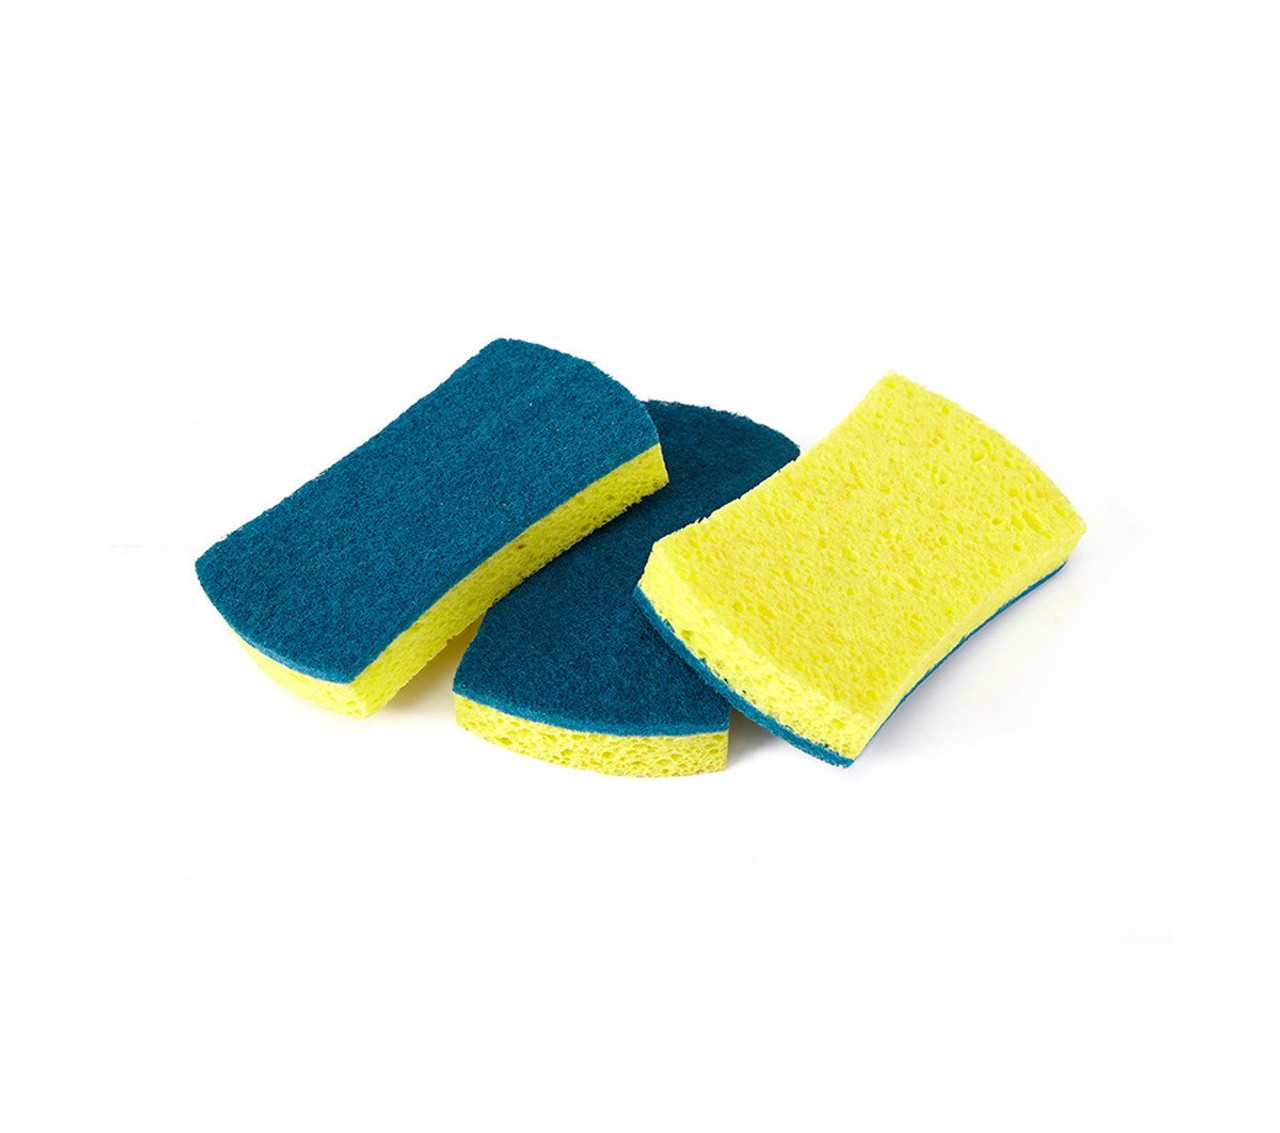 Full Circle Refresh Two-in-One Scrubber Sponge - 3 Pack (FC 15214)